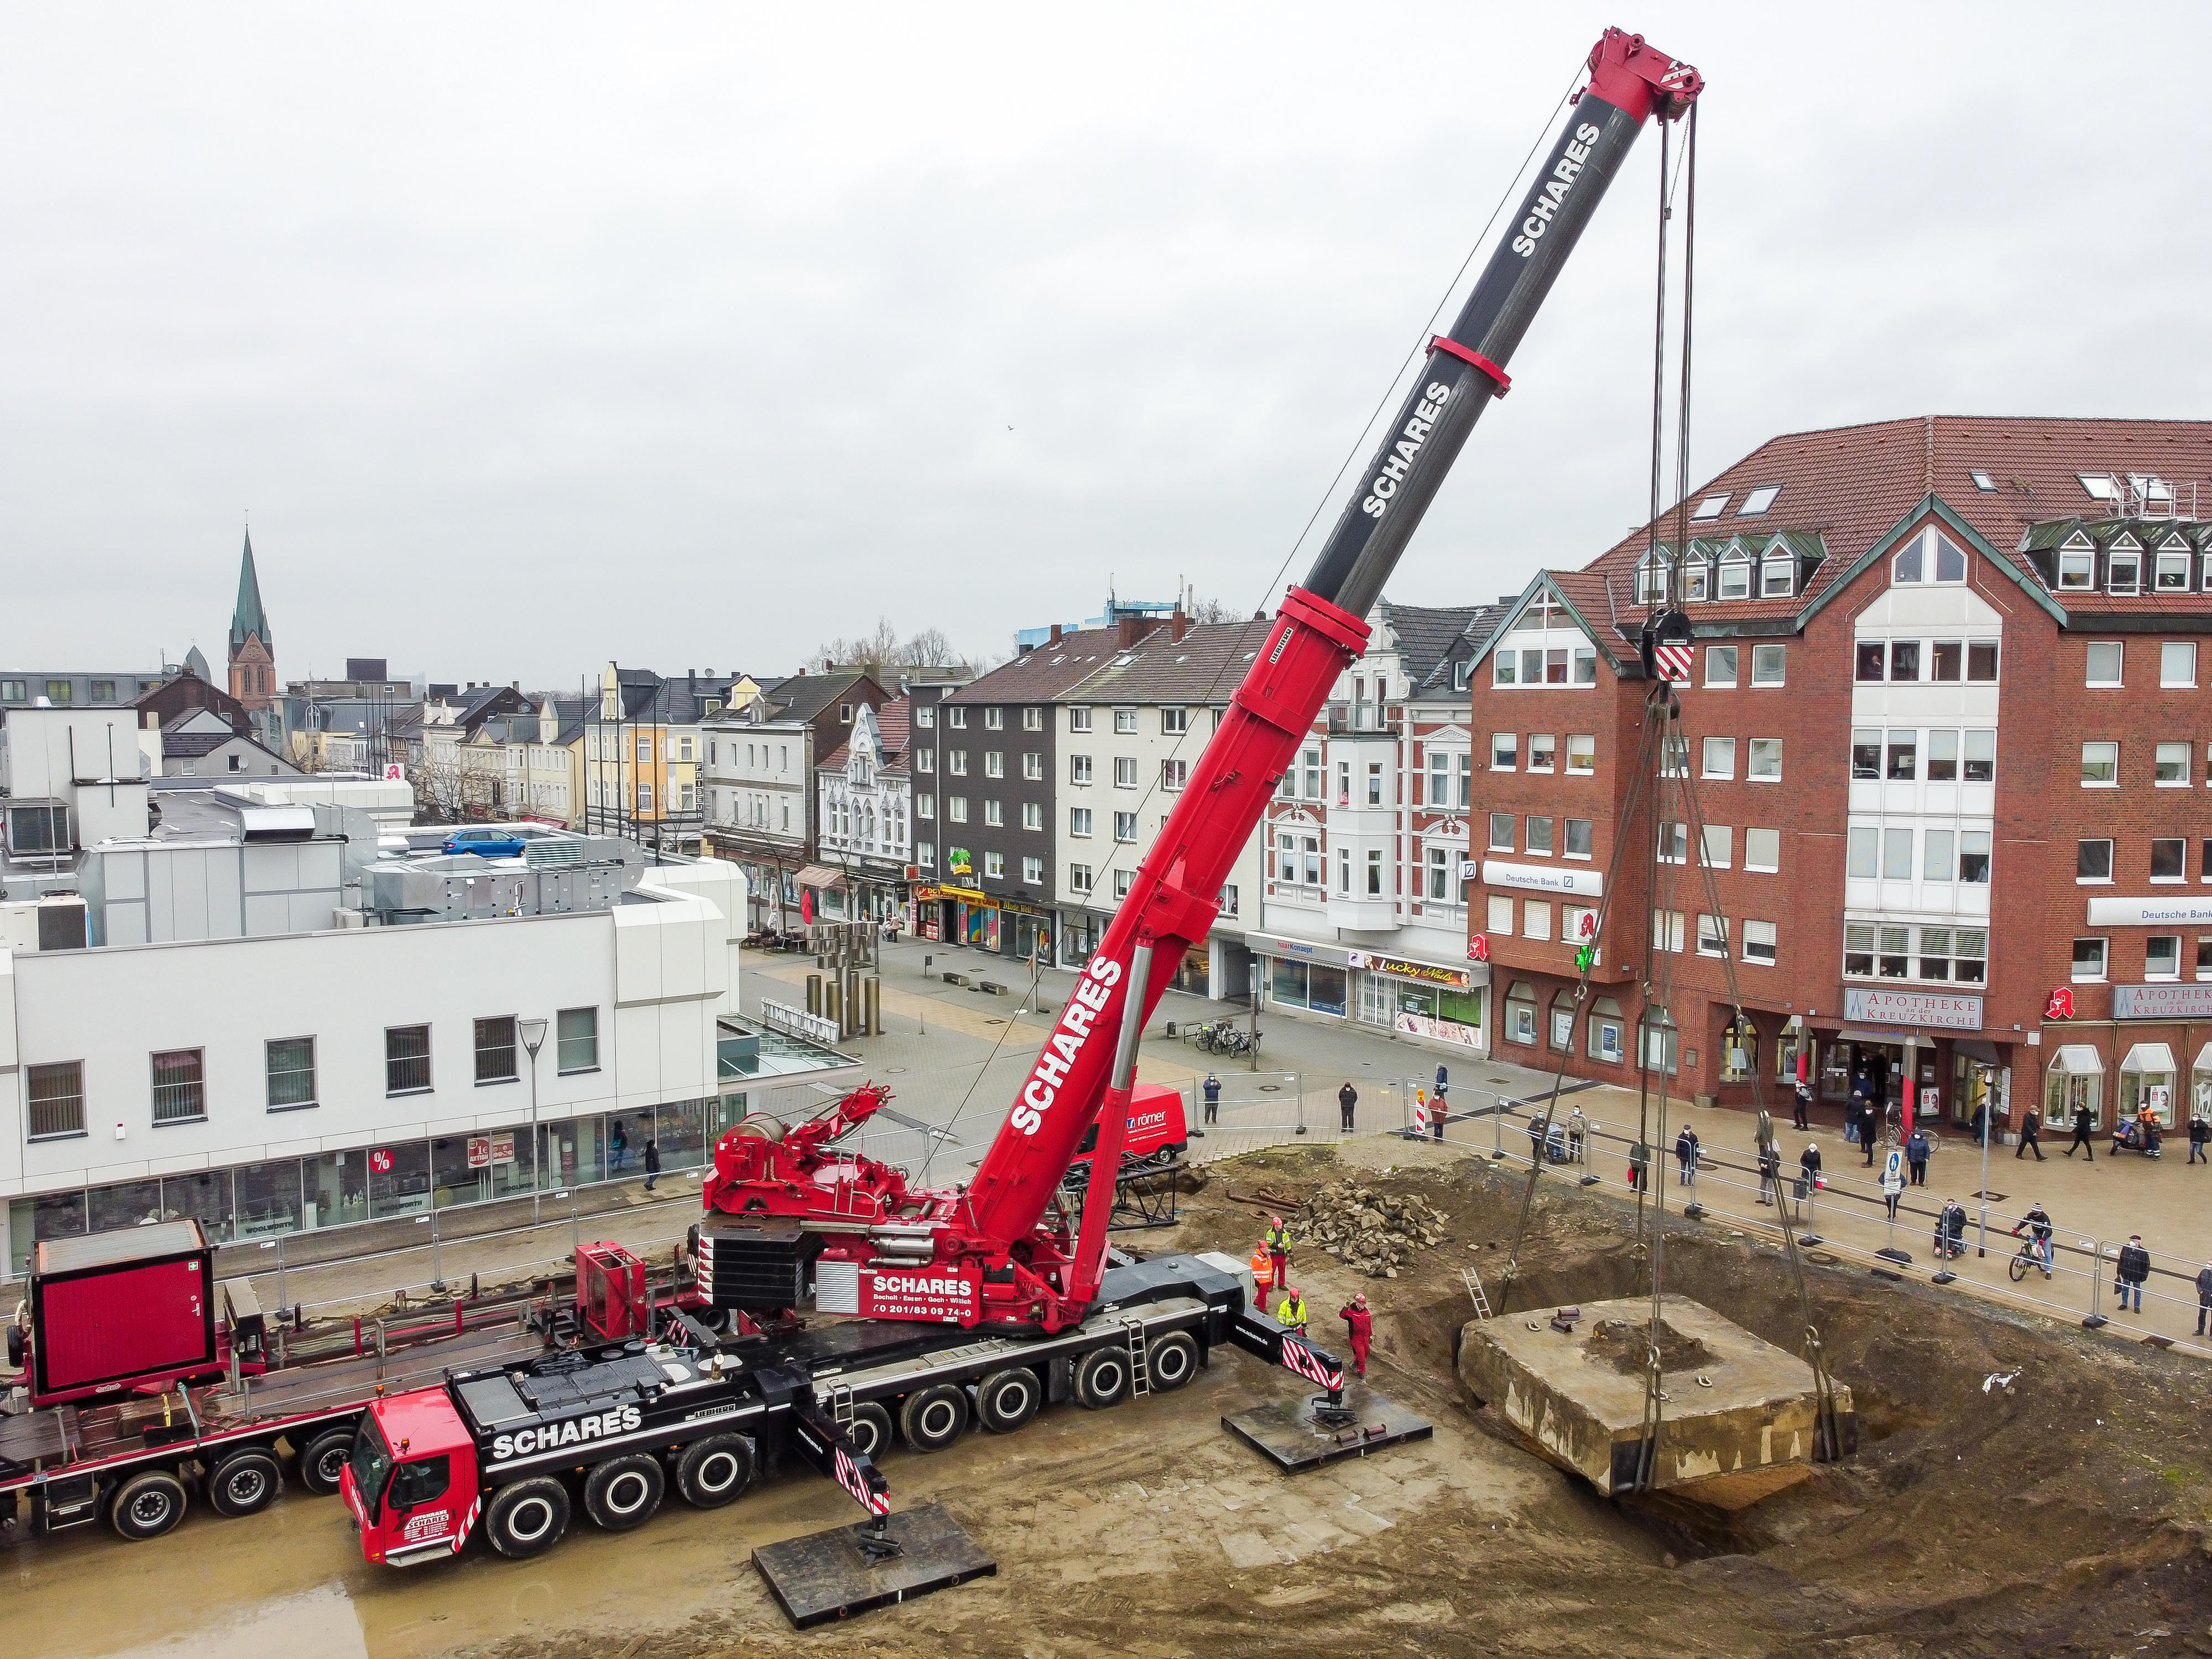 Heavyweight – The 30-year-old concrete colossus weighs in at a massive 104 tonnes.